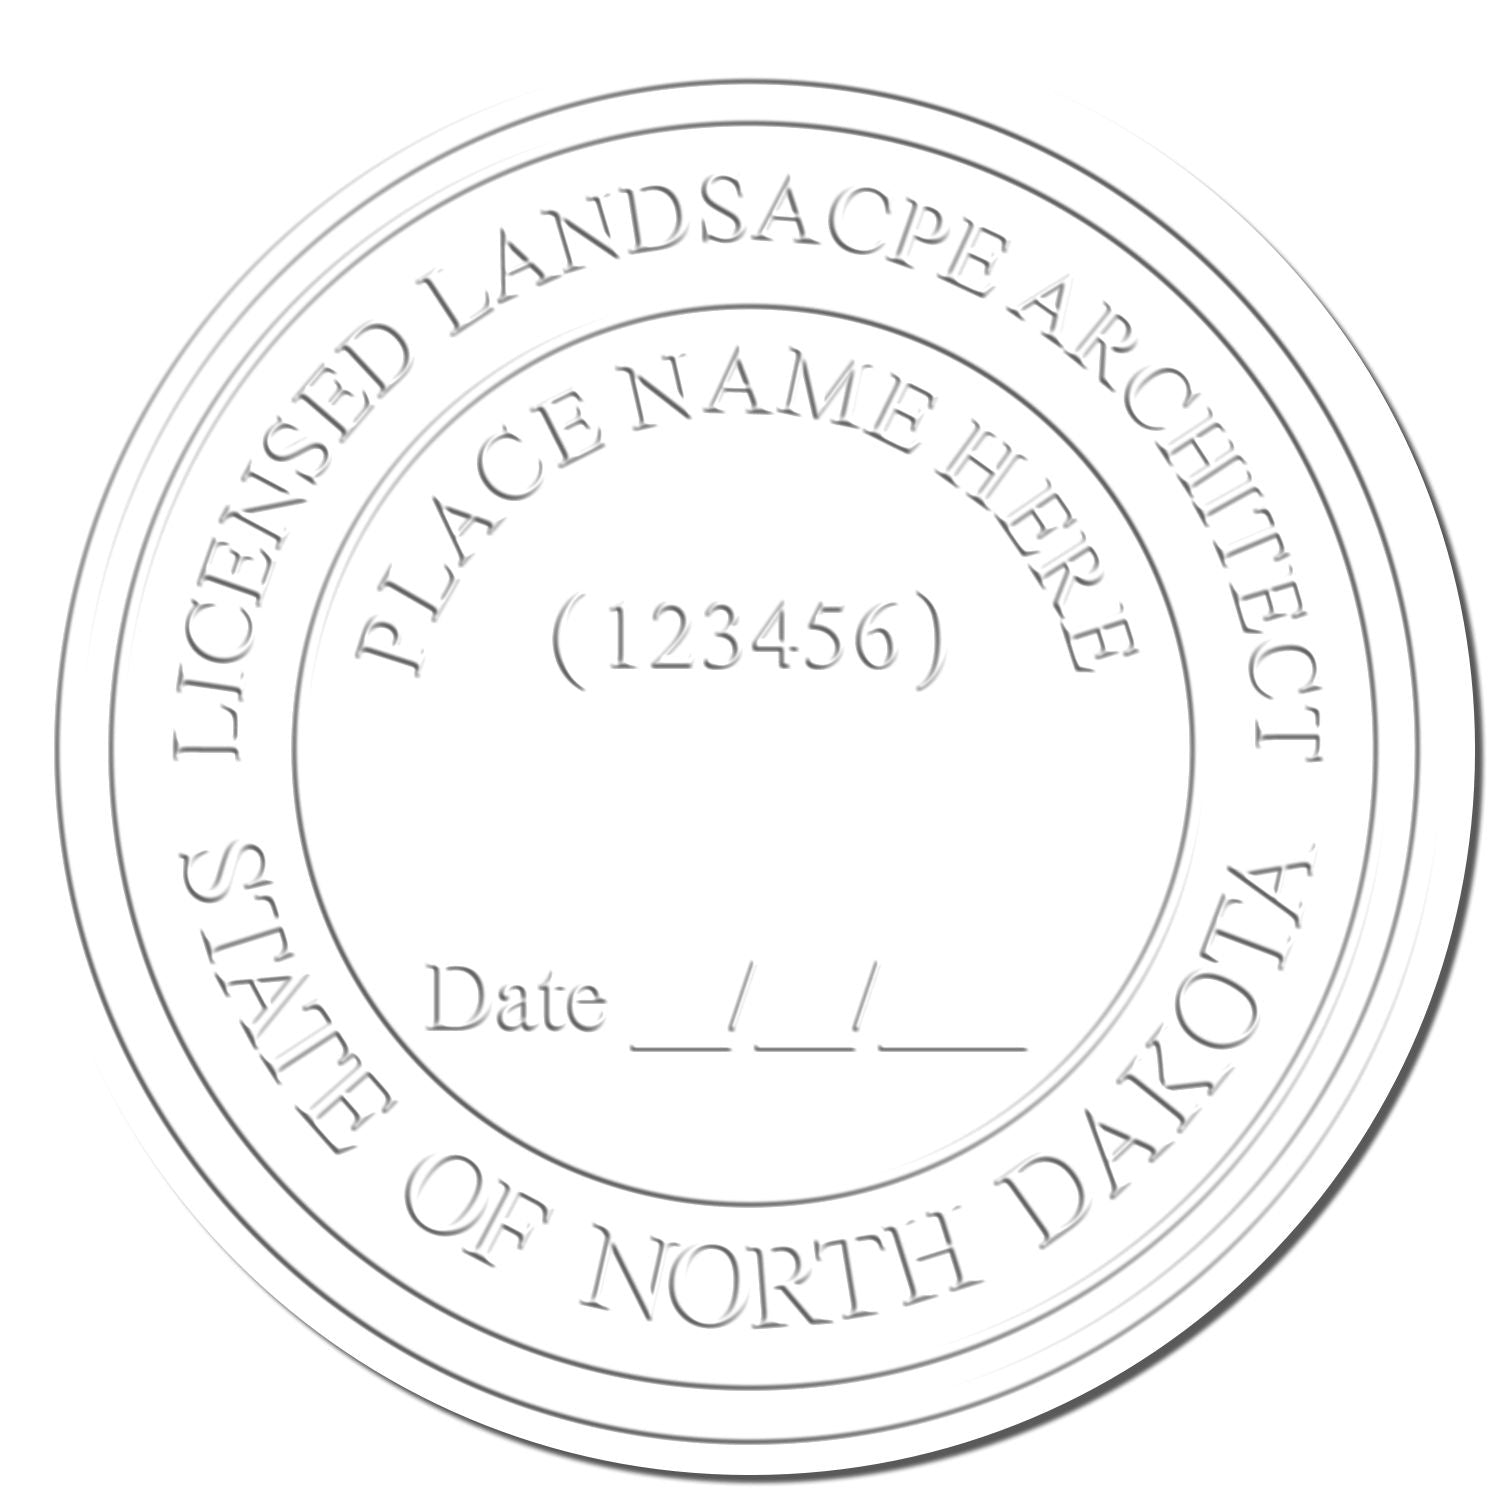 This paper is stamped with a sample imprint of the Soft Pocket North Dakota Landscape Architect Embosser, signifying its quality and reliability.